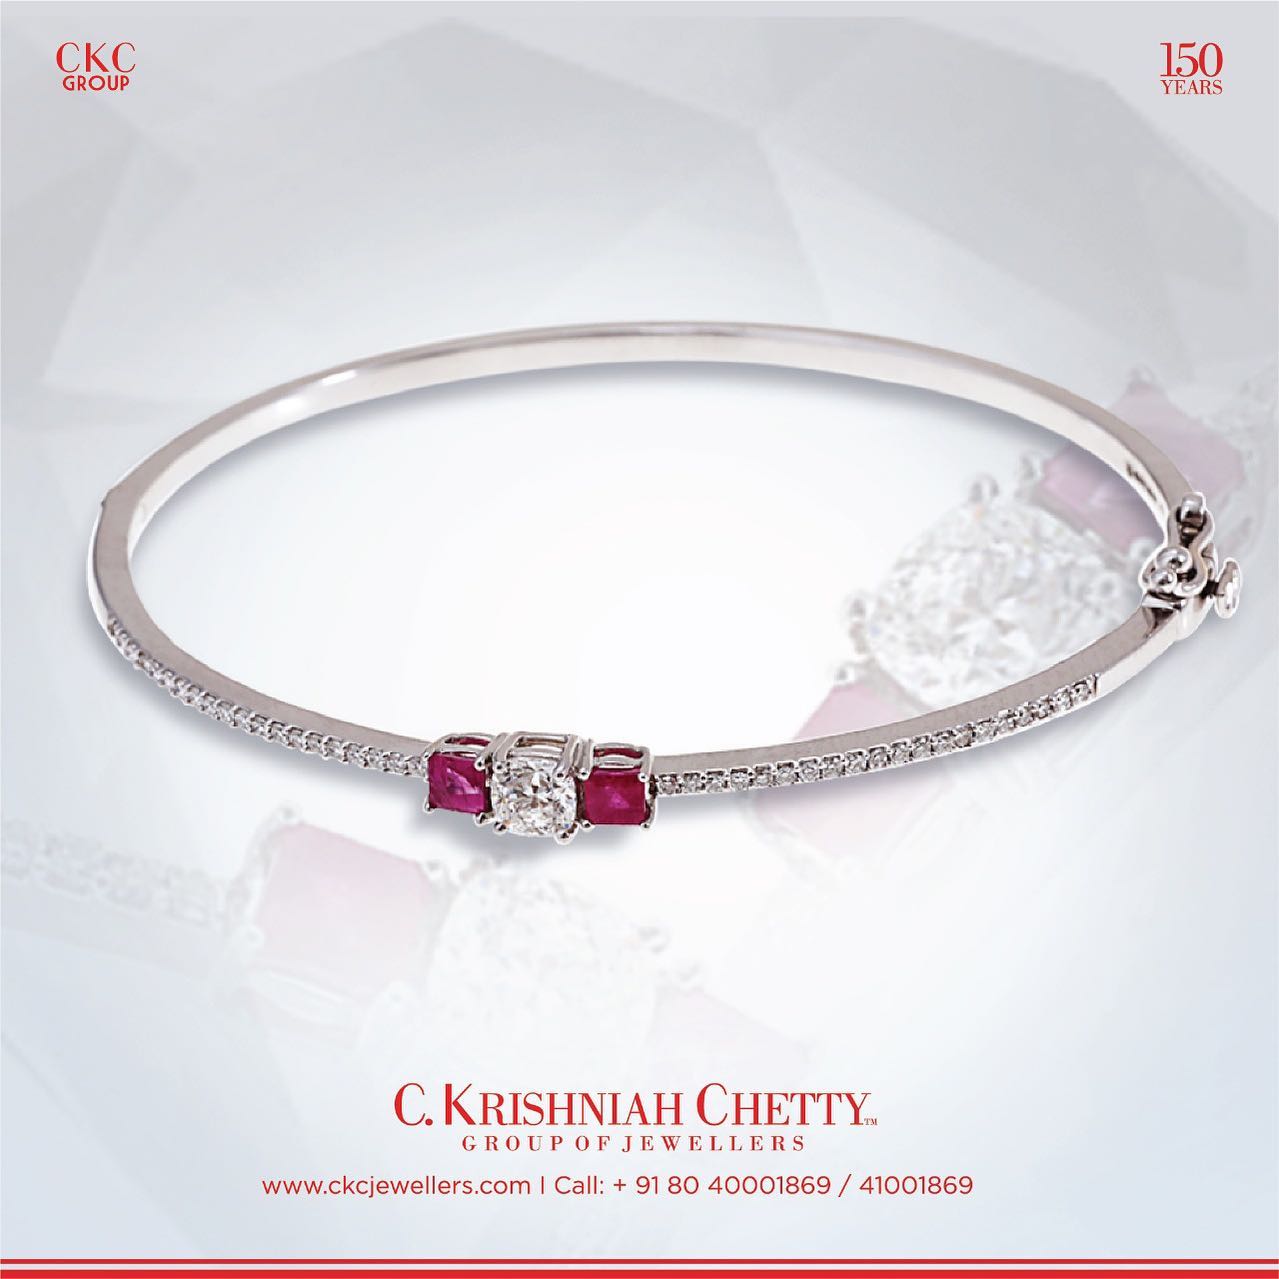 Ckc jewellers review